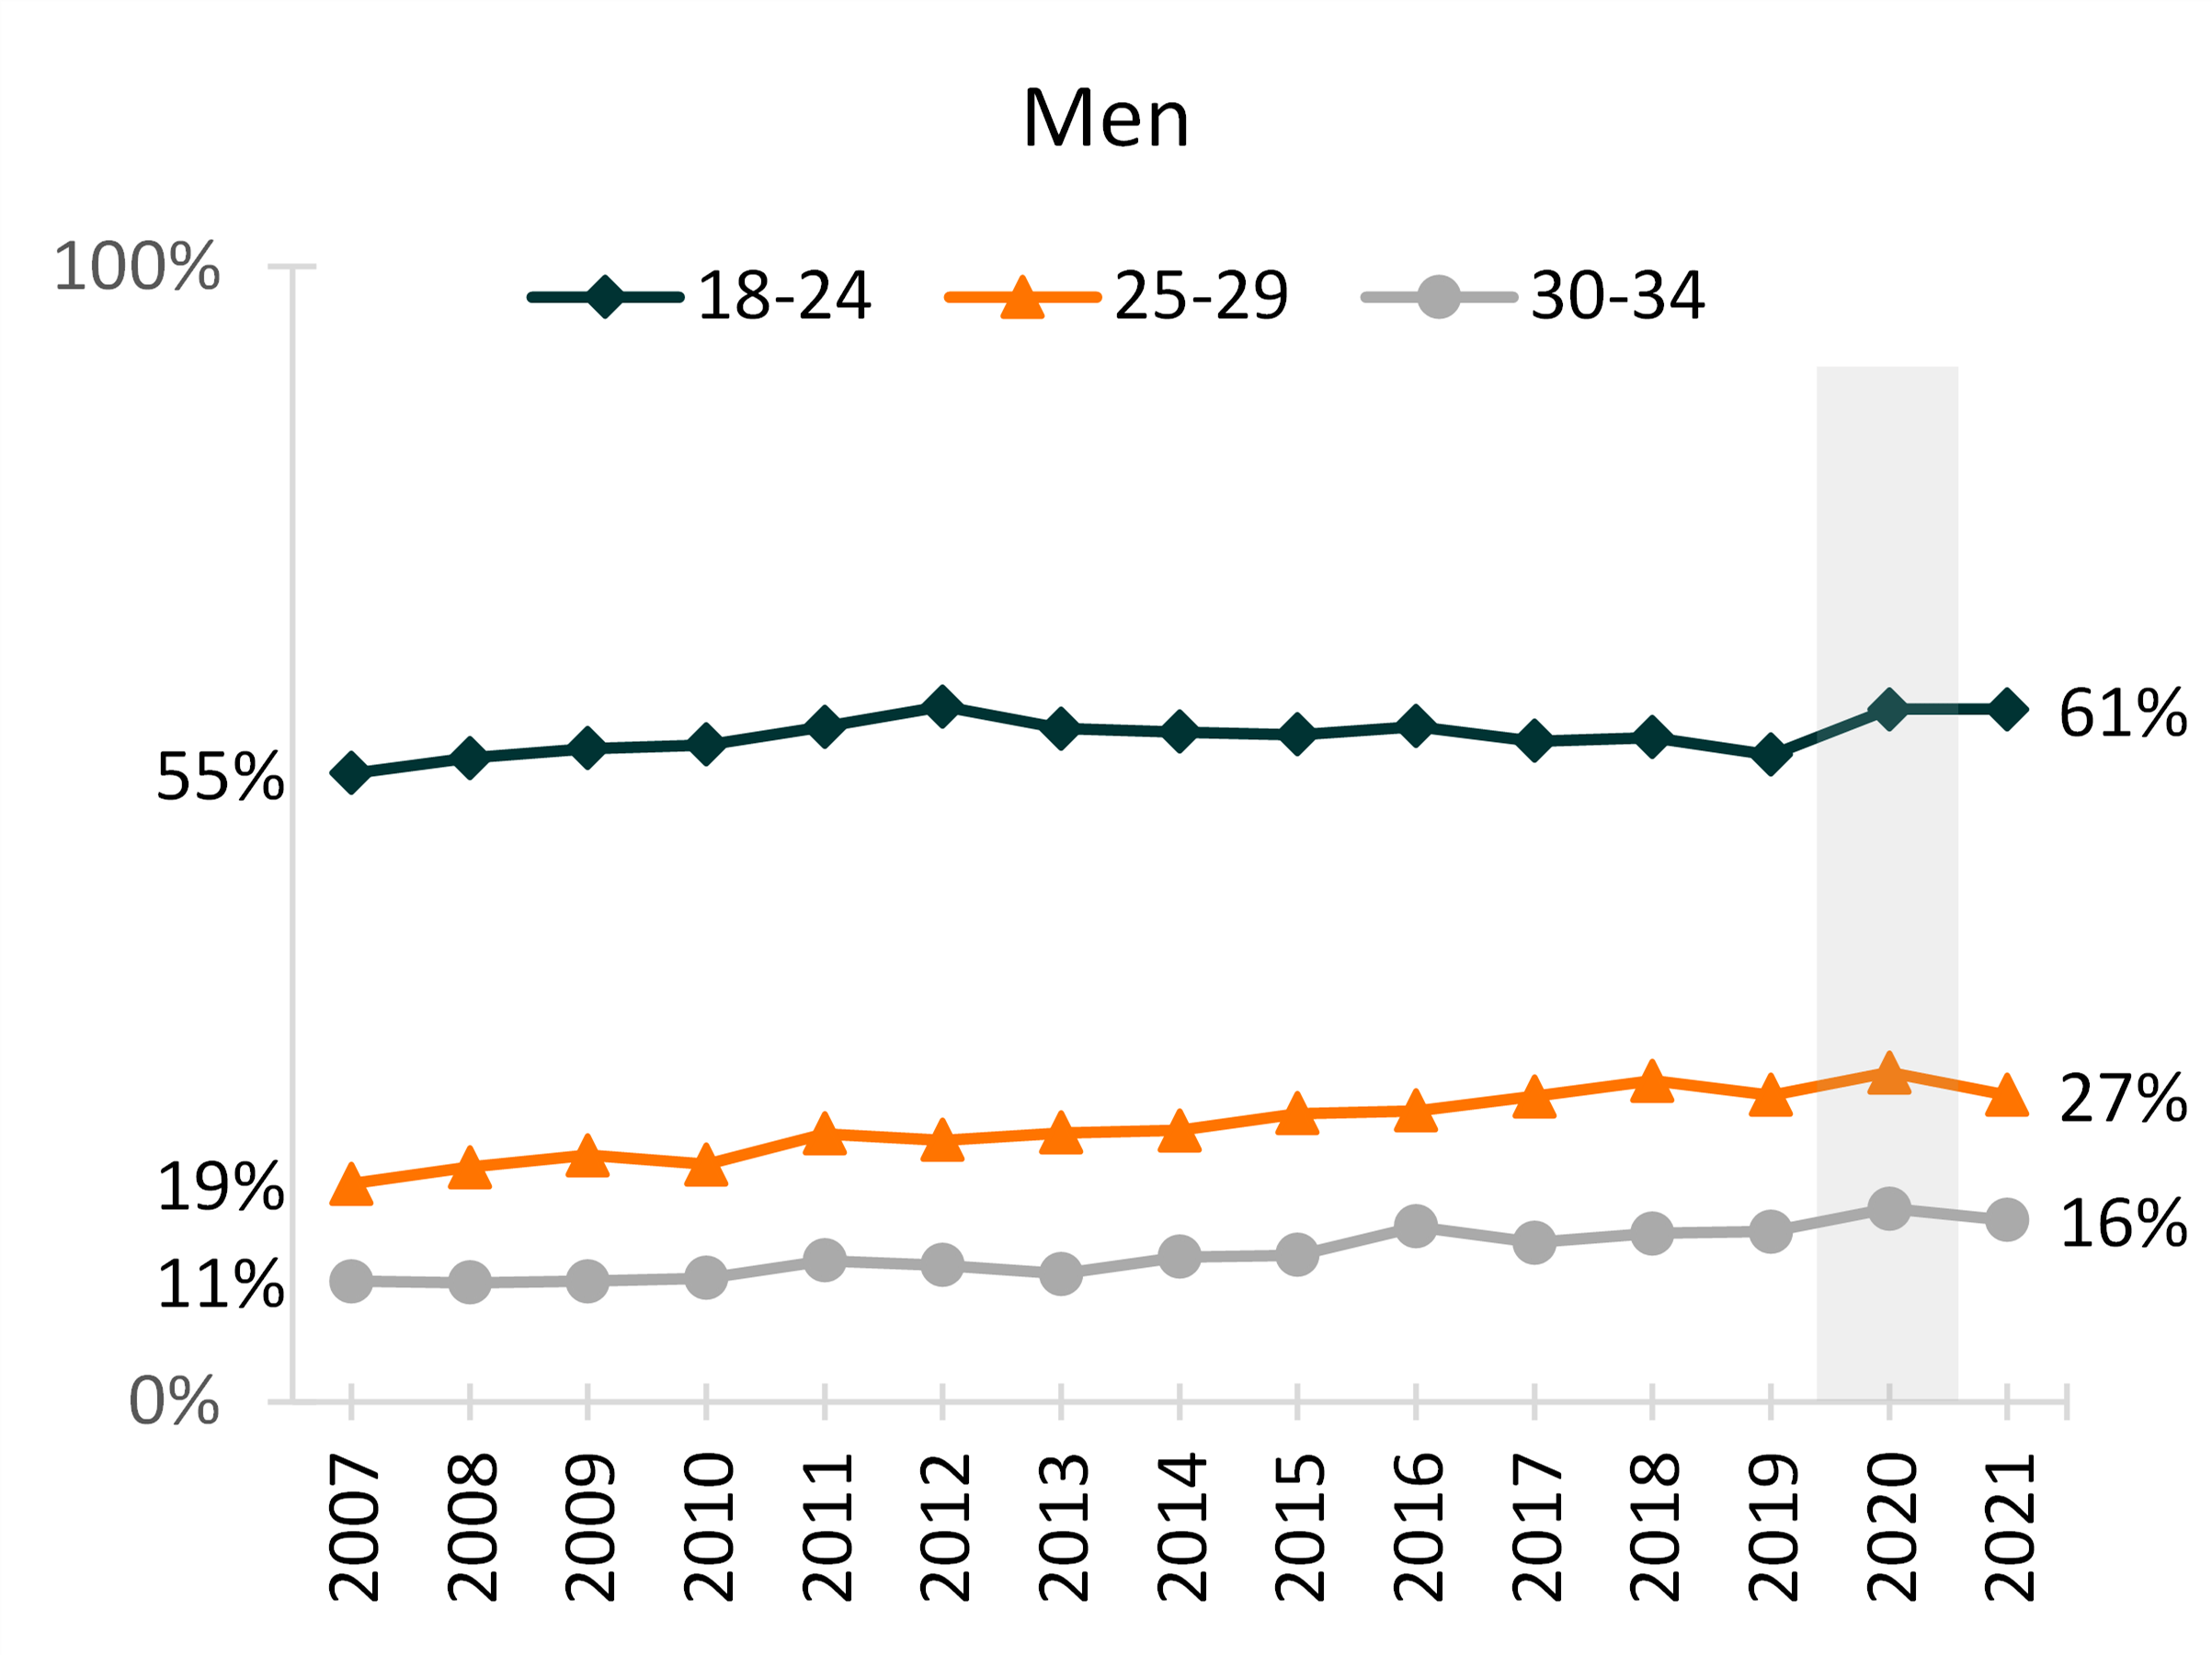 black-orange-gray-graph-showing-share-of-young-men-living-in-parental-home-by-gender-and-age-group-2007-2021